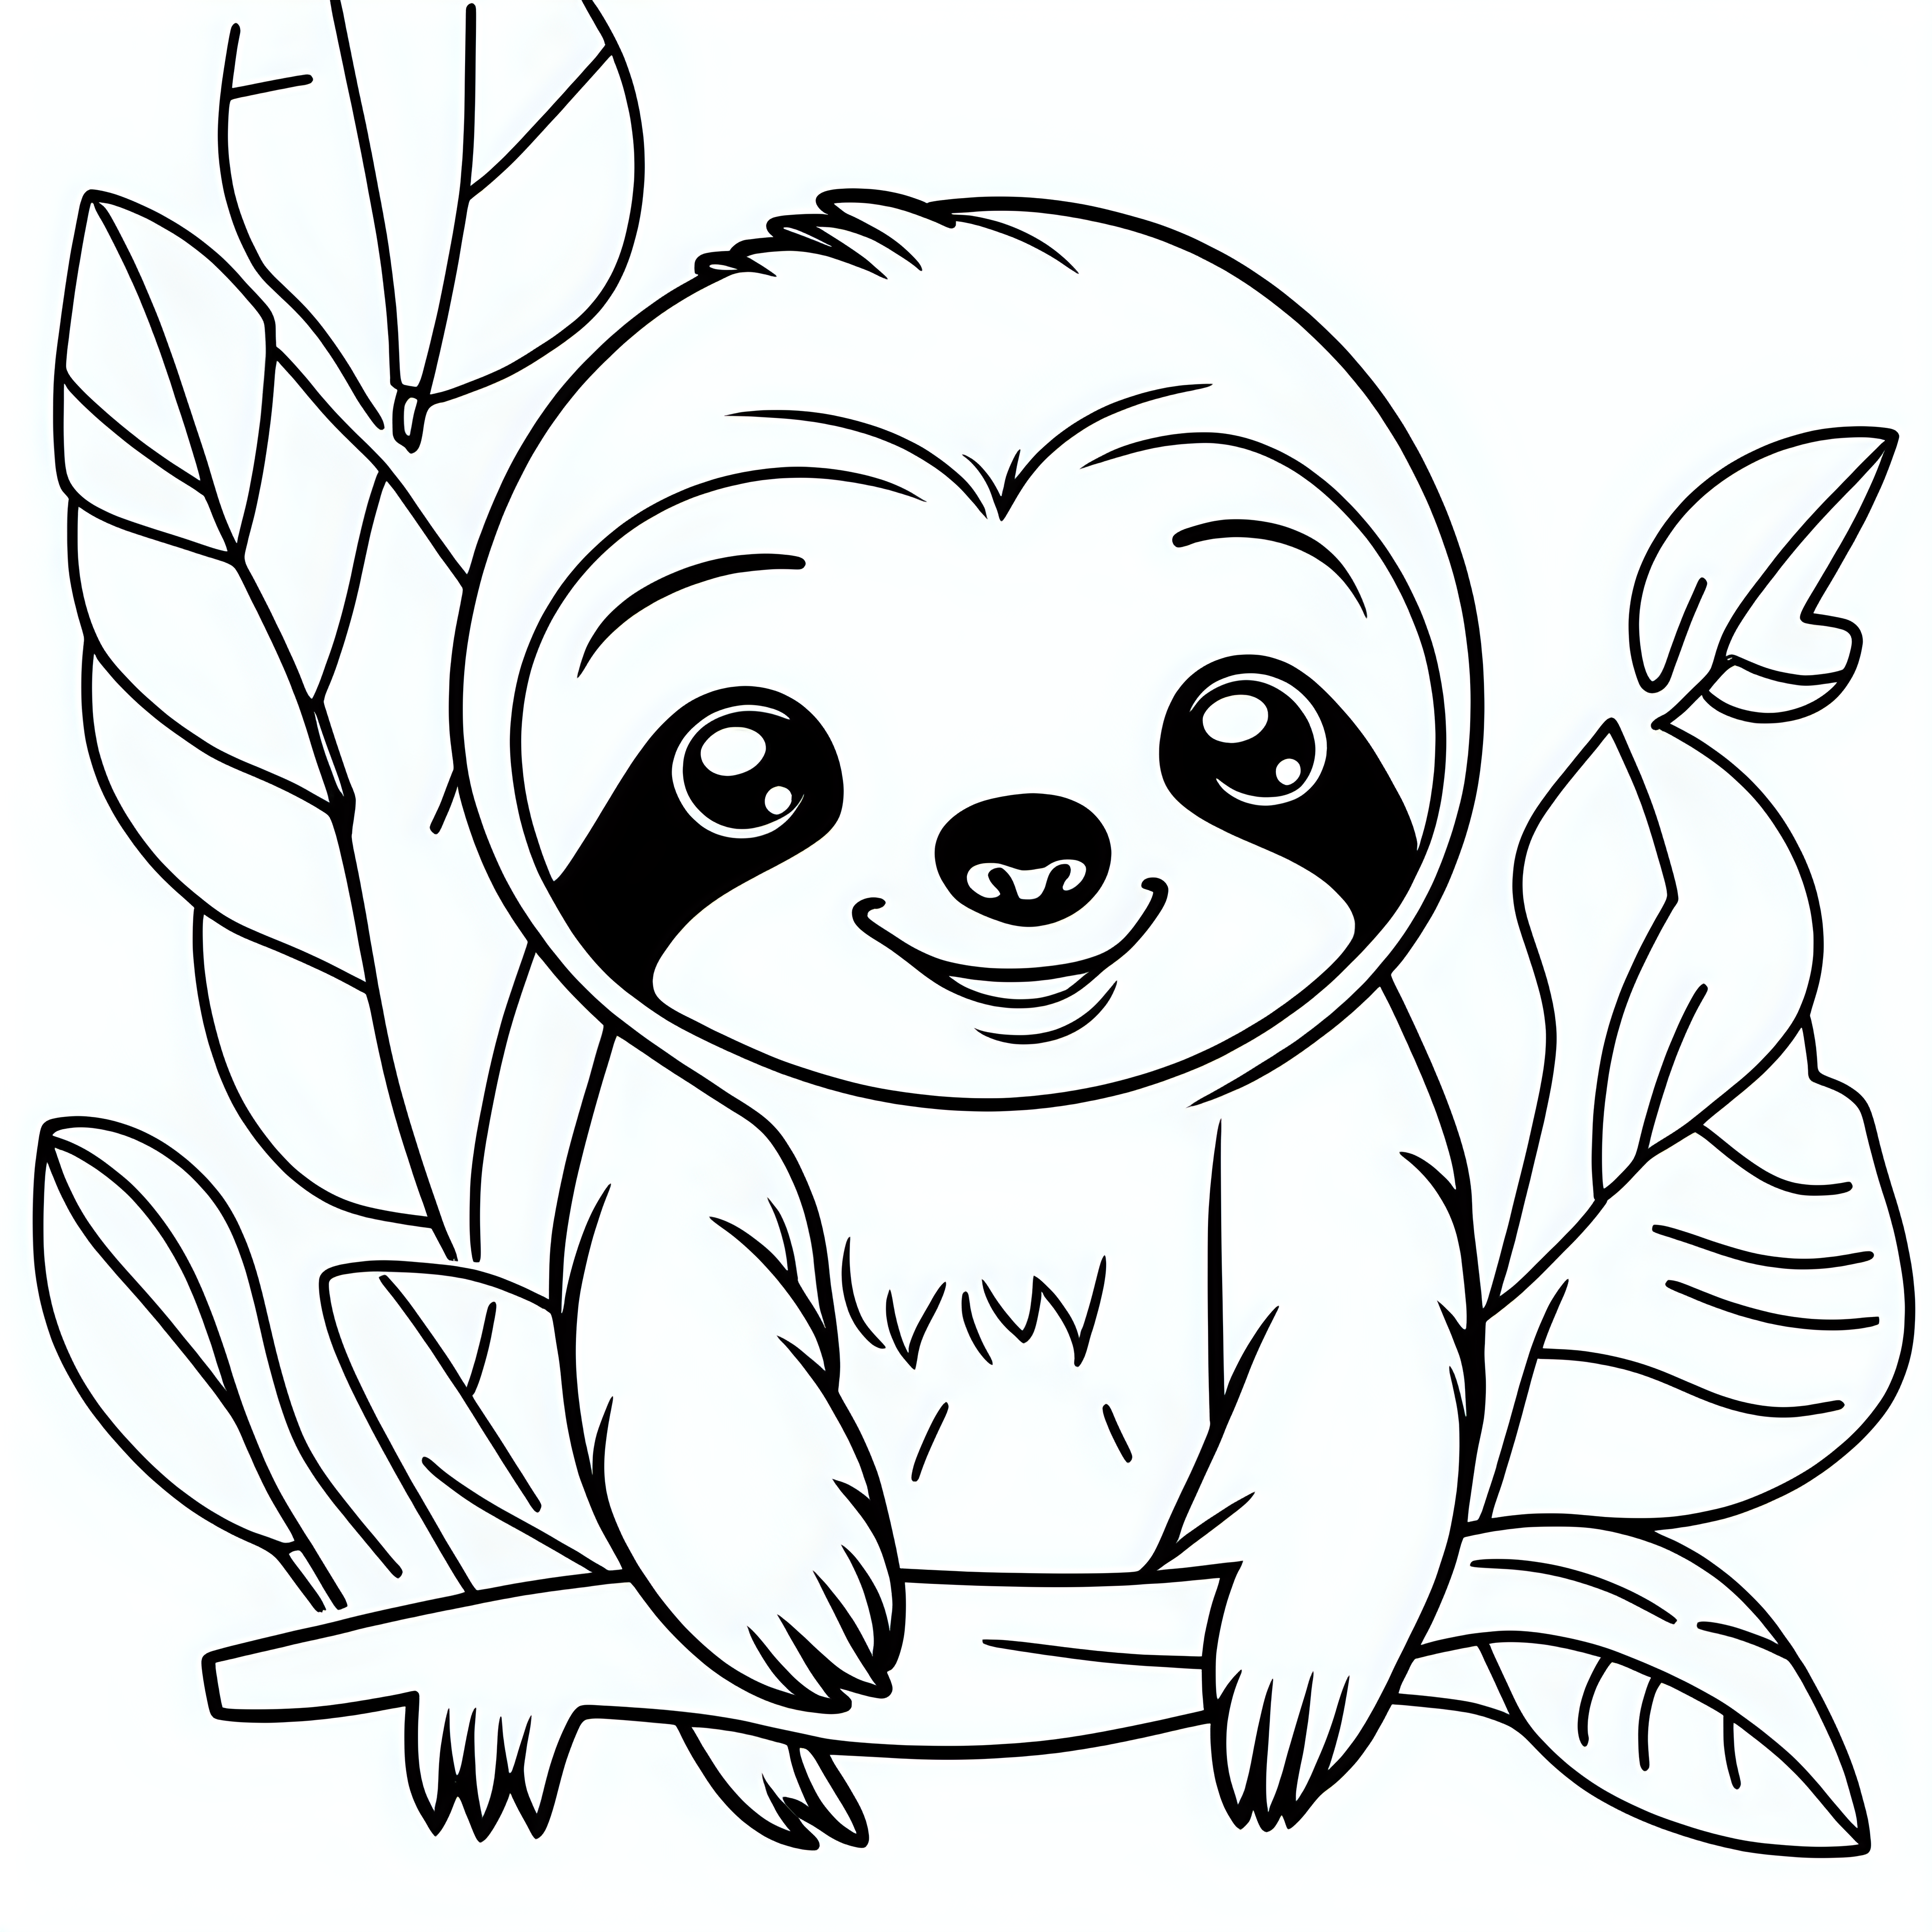 draw a cute sloth with only the outline